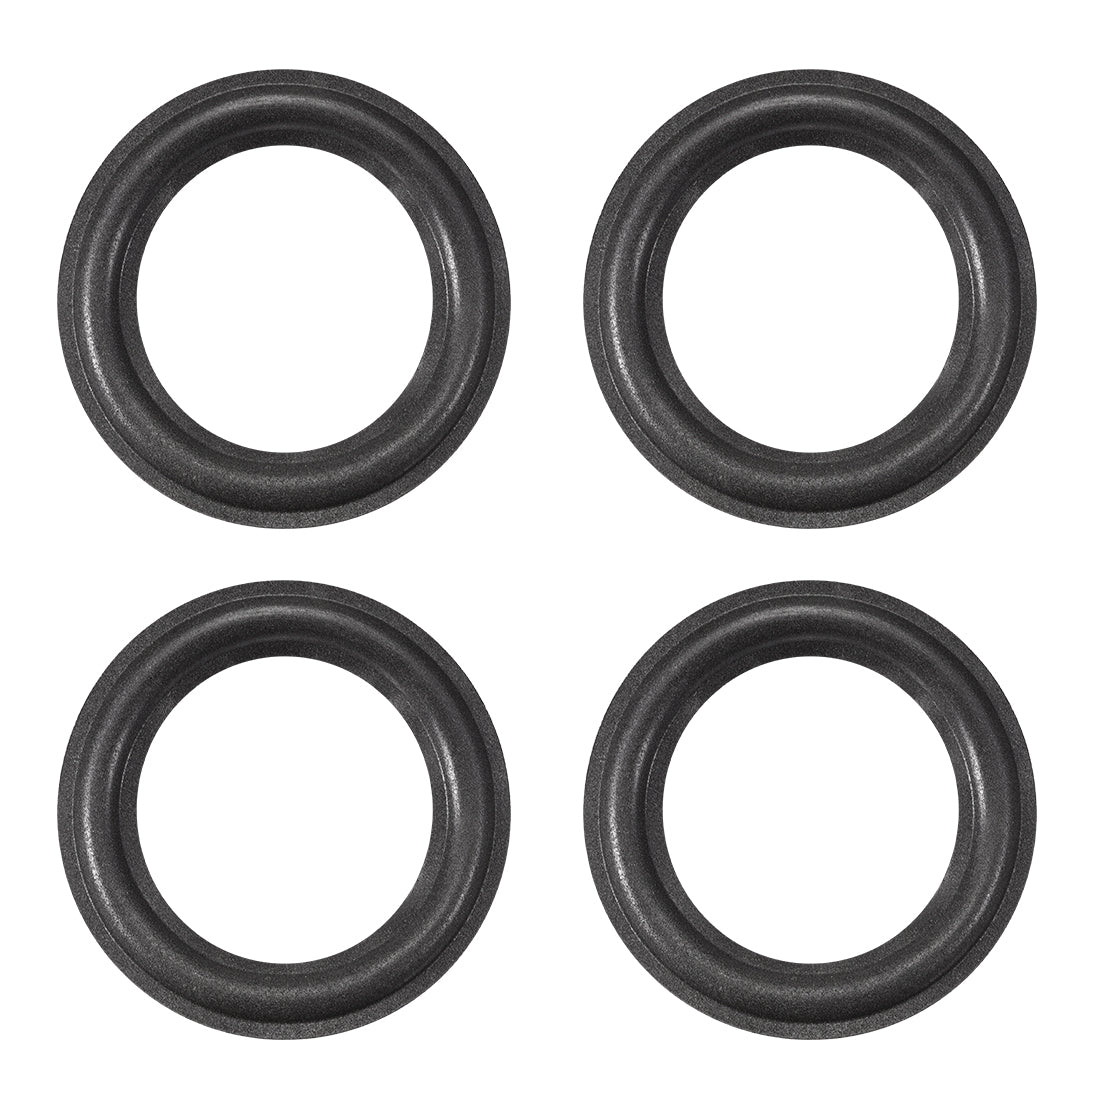 uxcell Uxcell 3.5" 3.5 inches Speaker Foam Edge Surround Rings Replacement Parts for Speaker Repair or DIY 4pcs